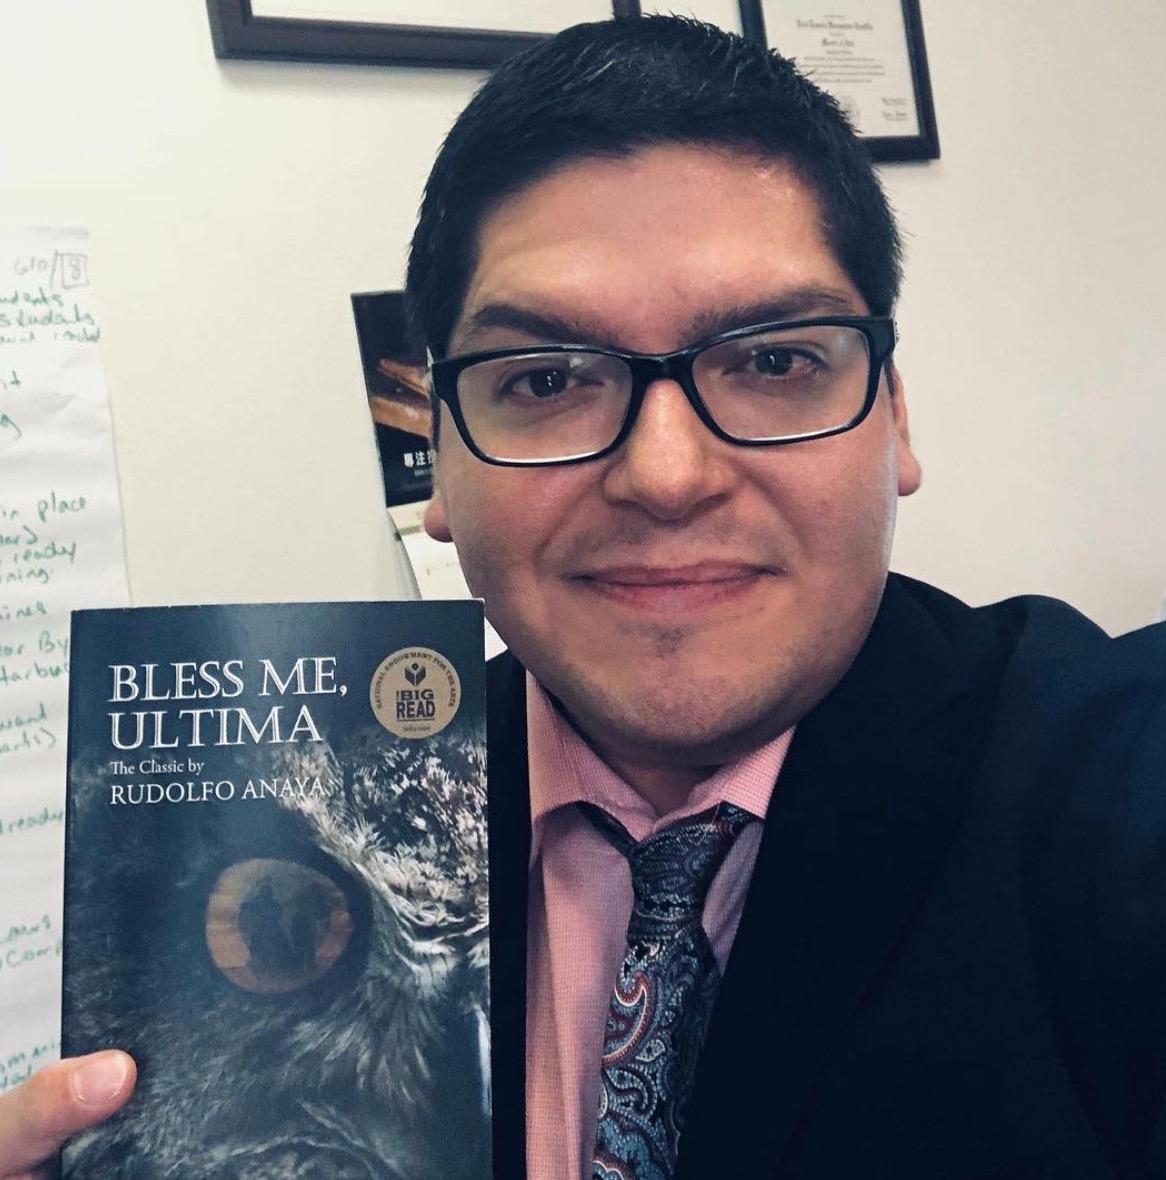 Eric Castillo hold a copy of Bless Me, Ultima